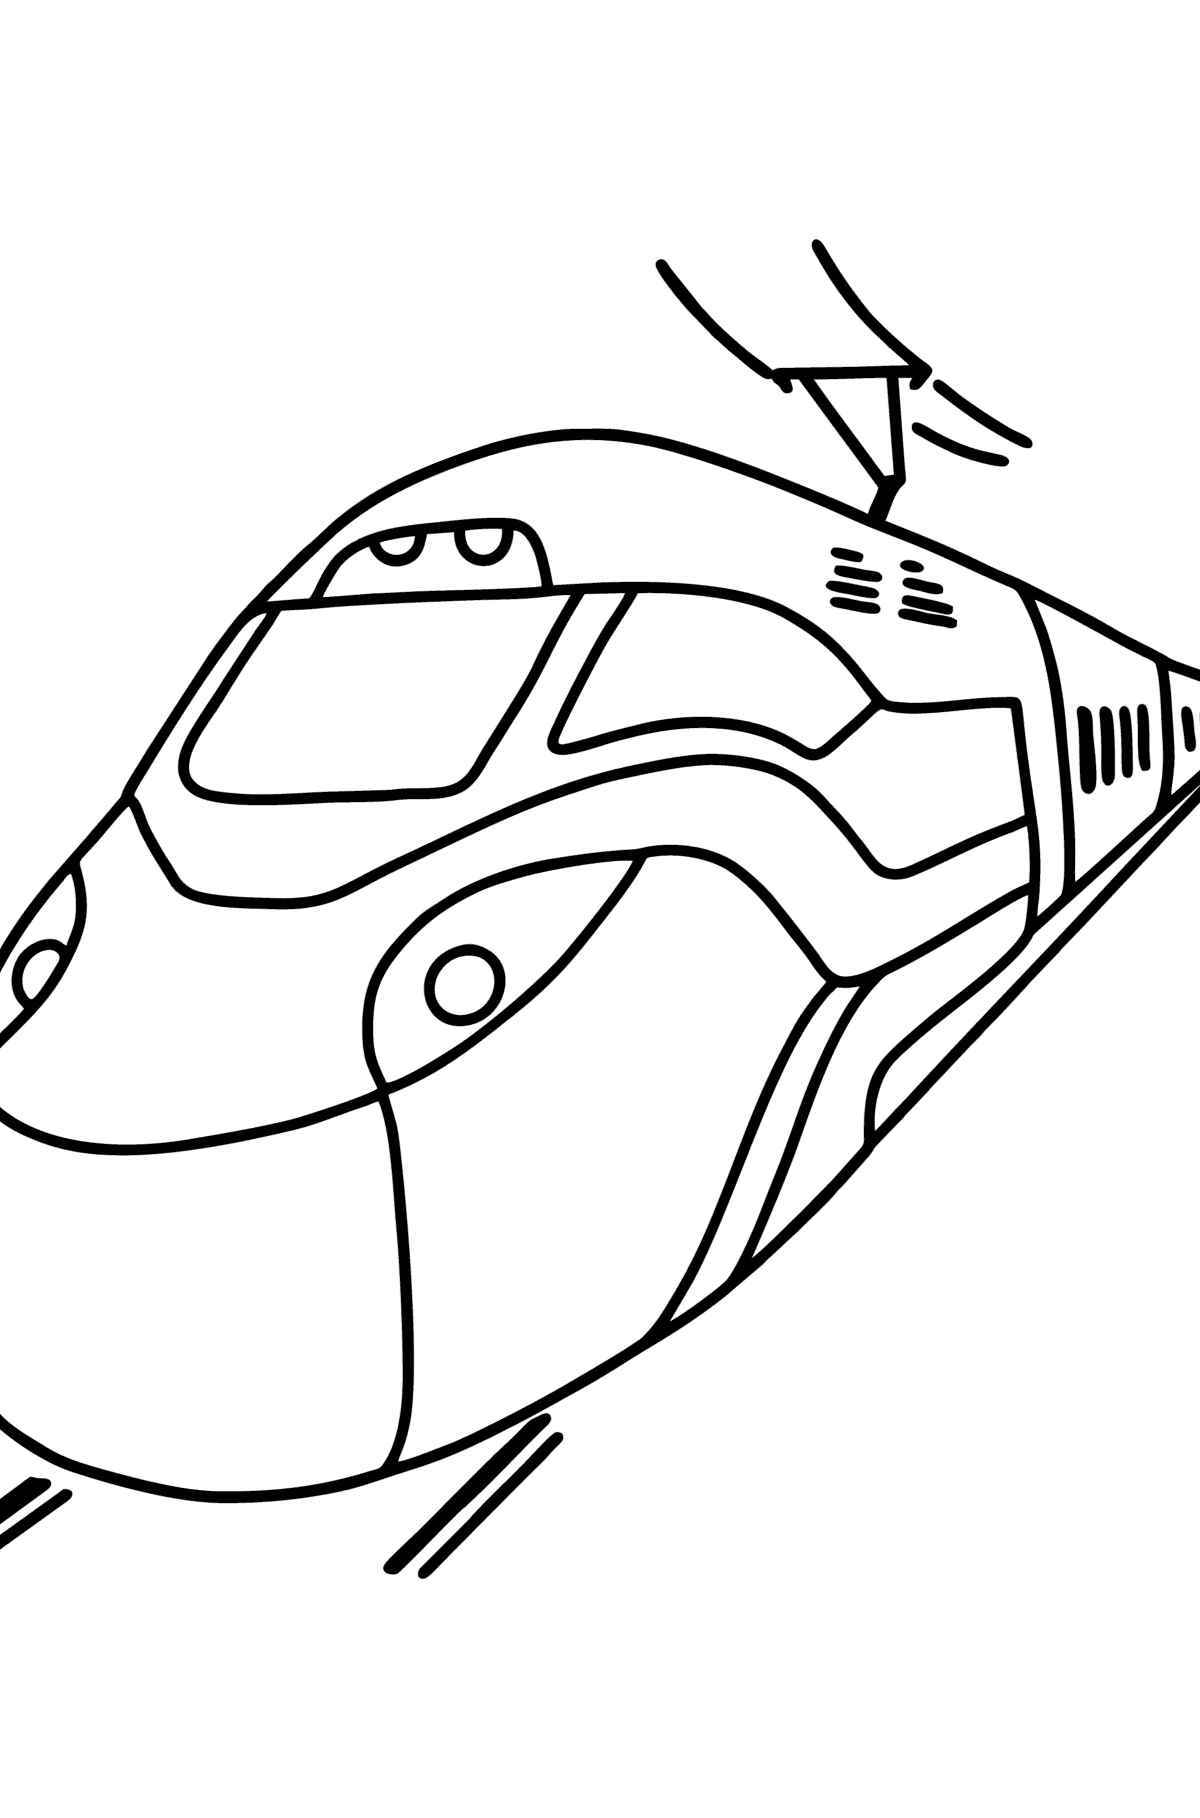 Train coloring page online   Download, Print, and Color Online